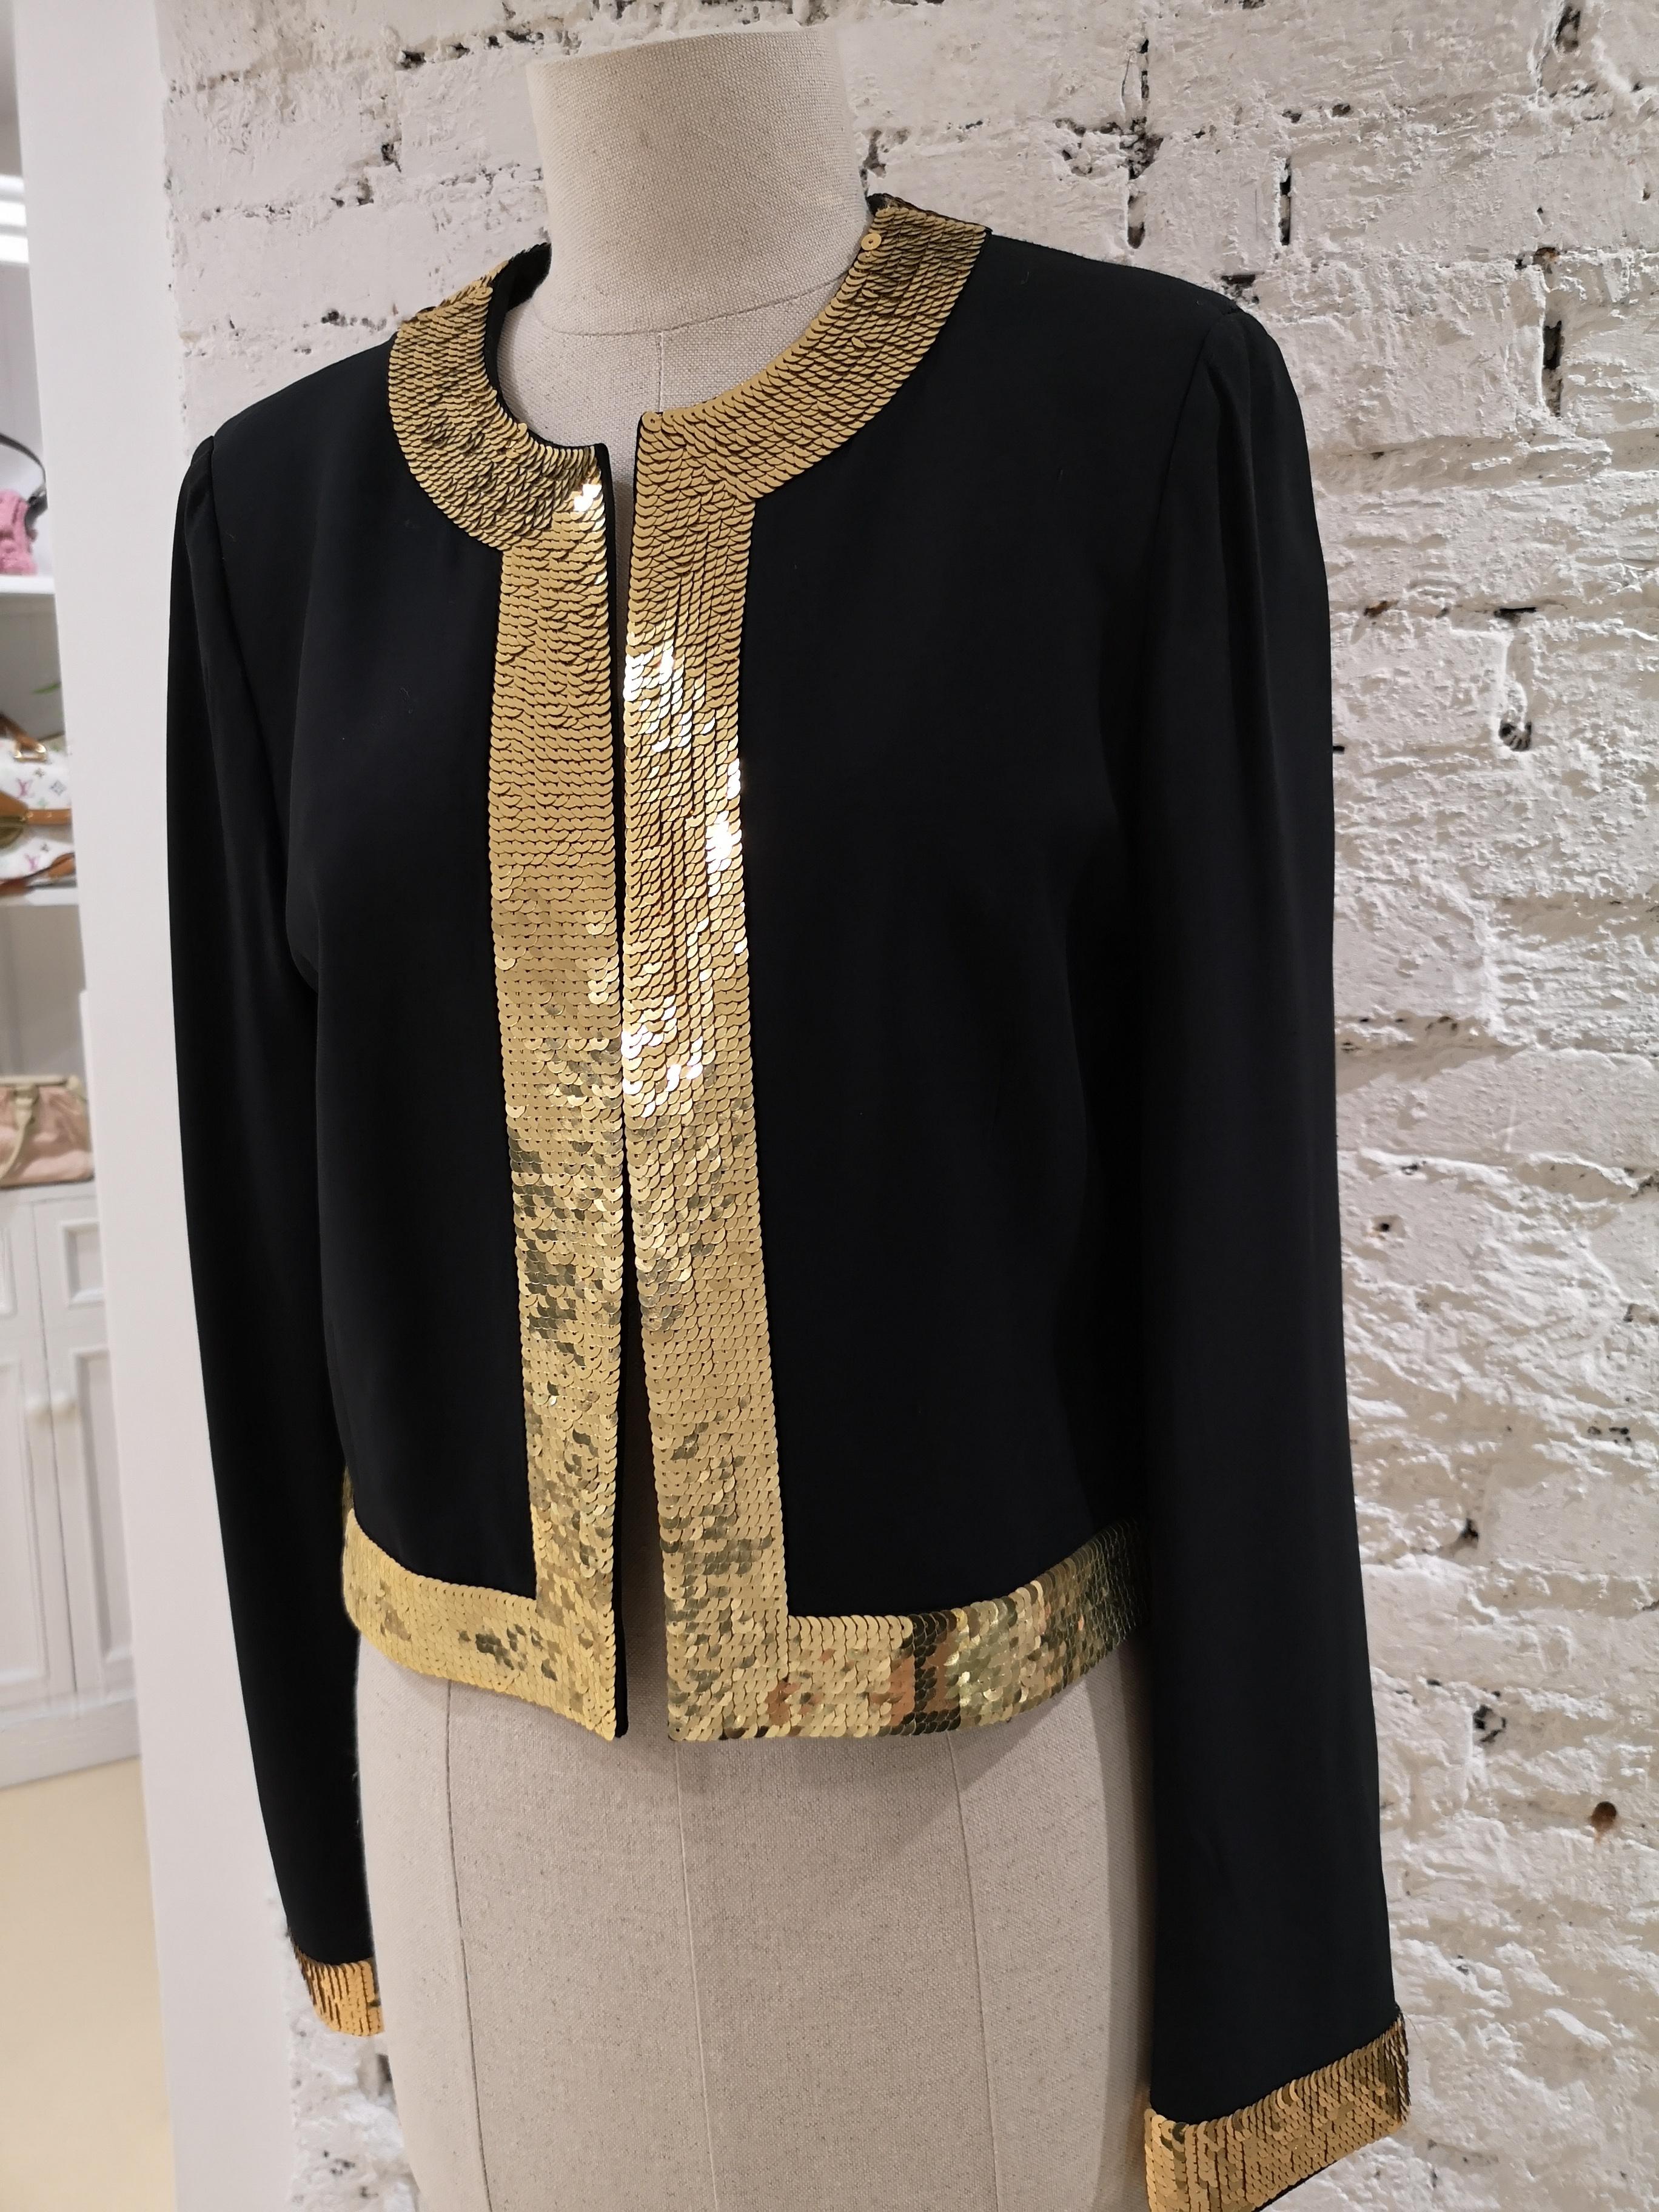 Moschino Wool Black Jacket Gold Sequins
totally made in italy in size 44
composition: wool
